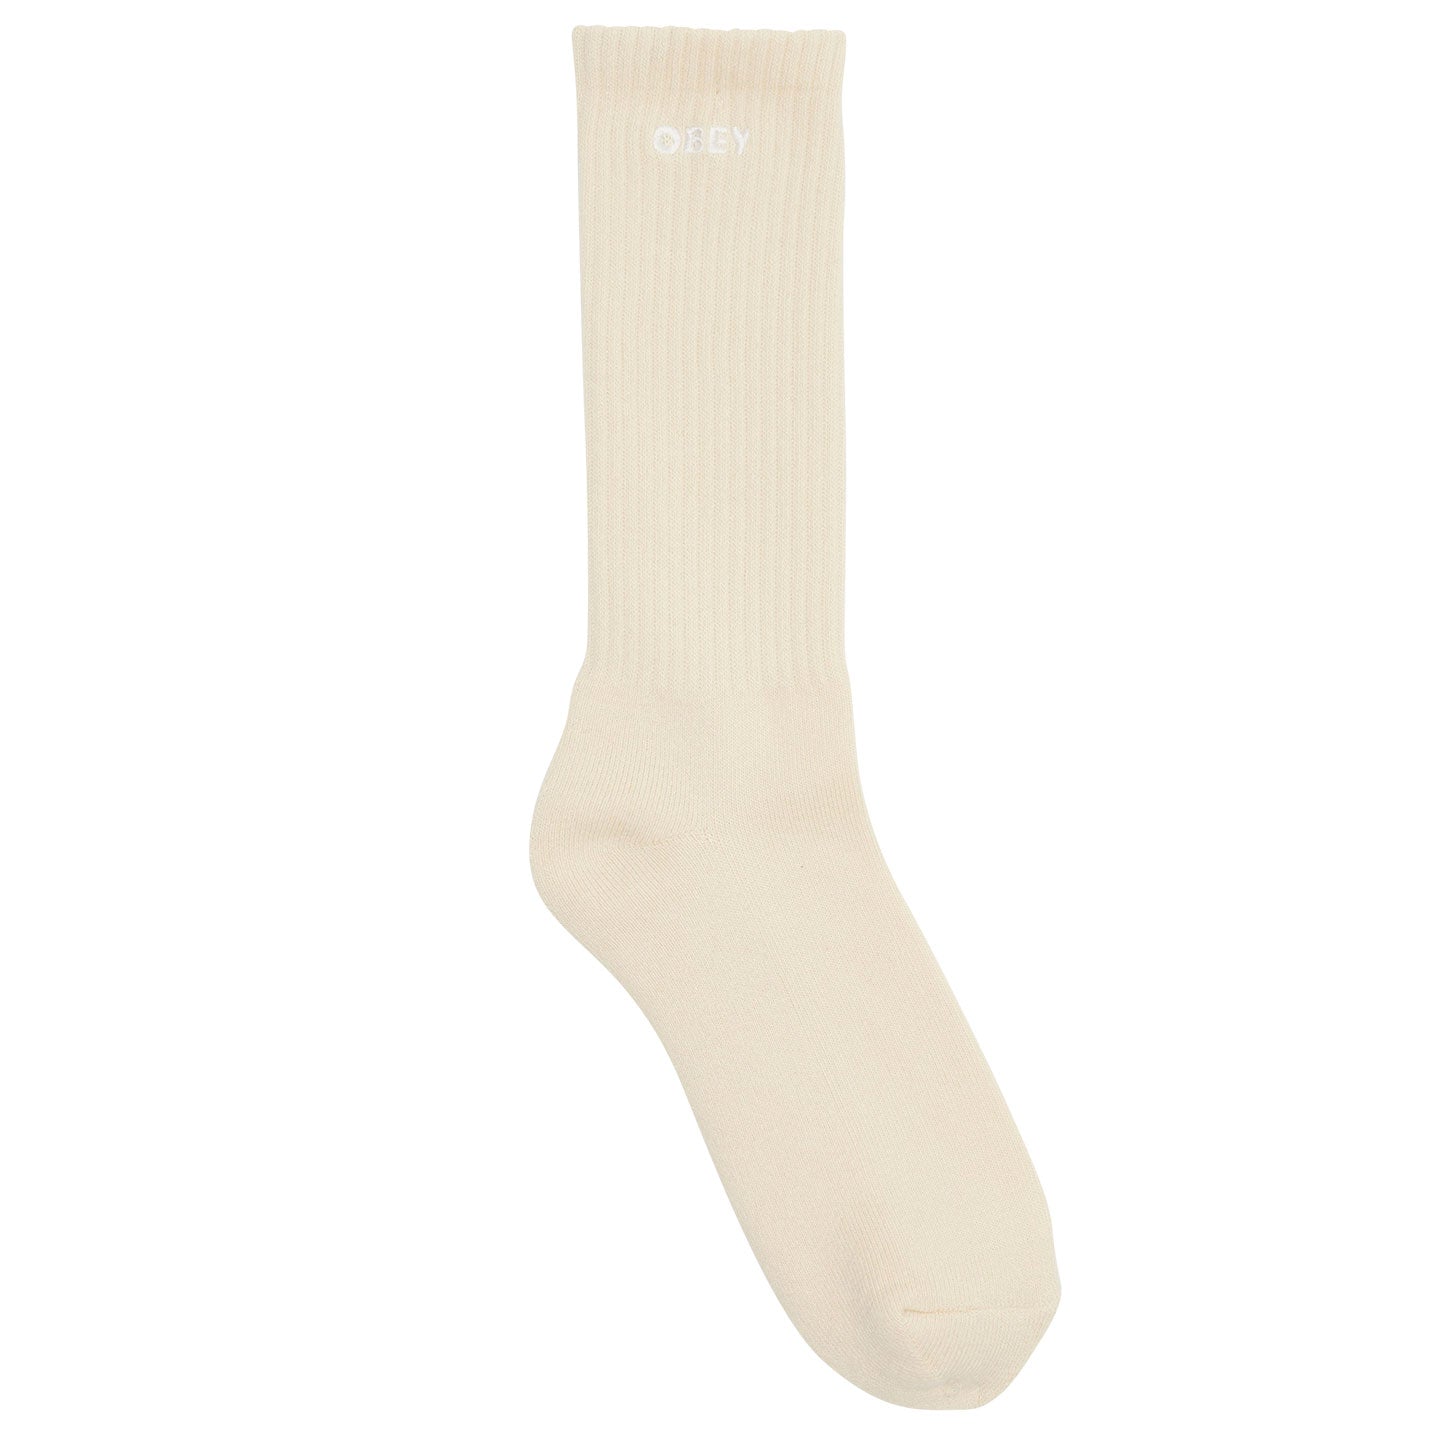 Obey Bold Socks (Unbleached)